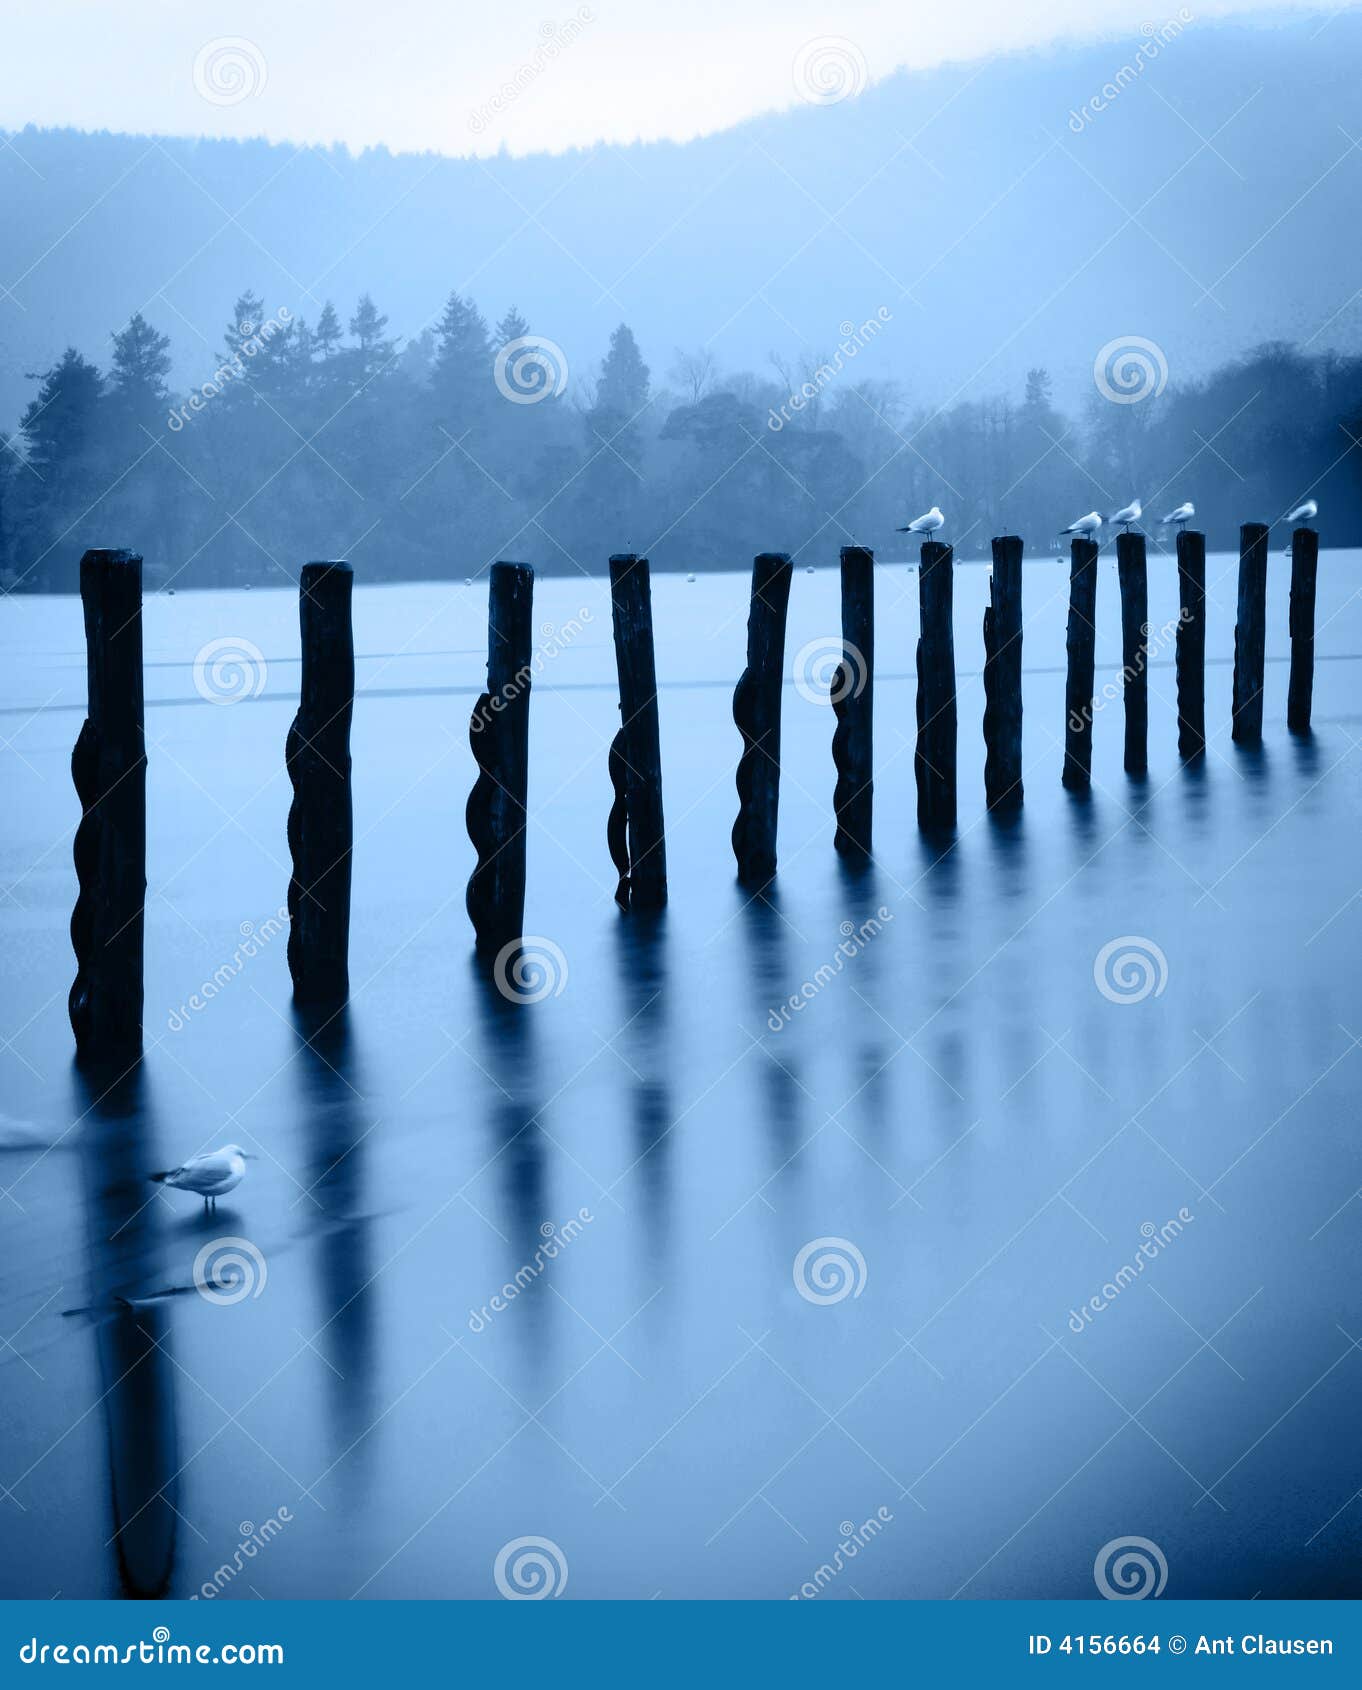 old wharf posts - artistic